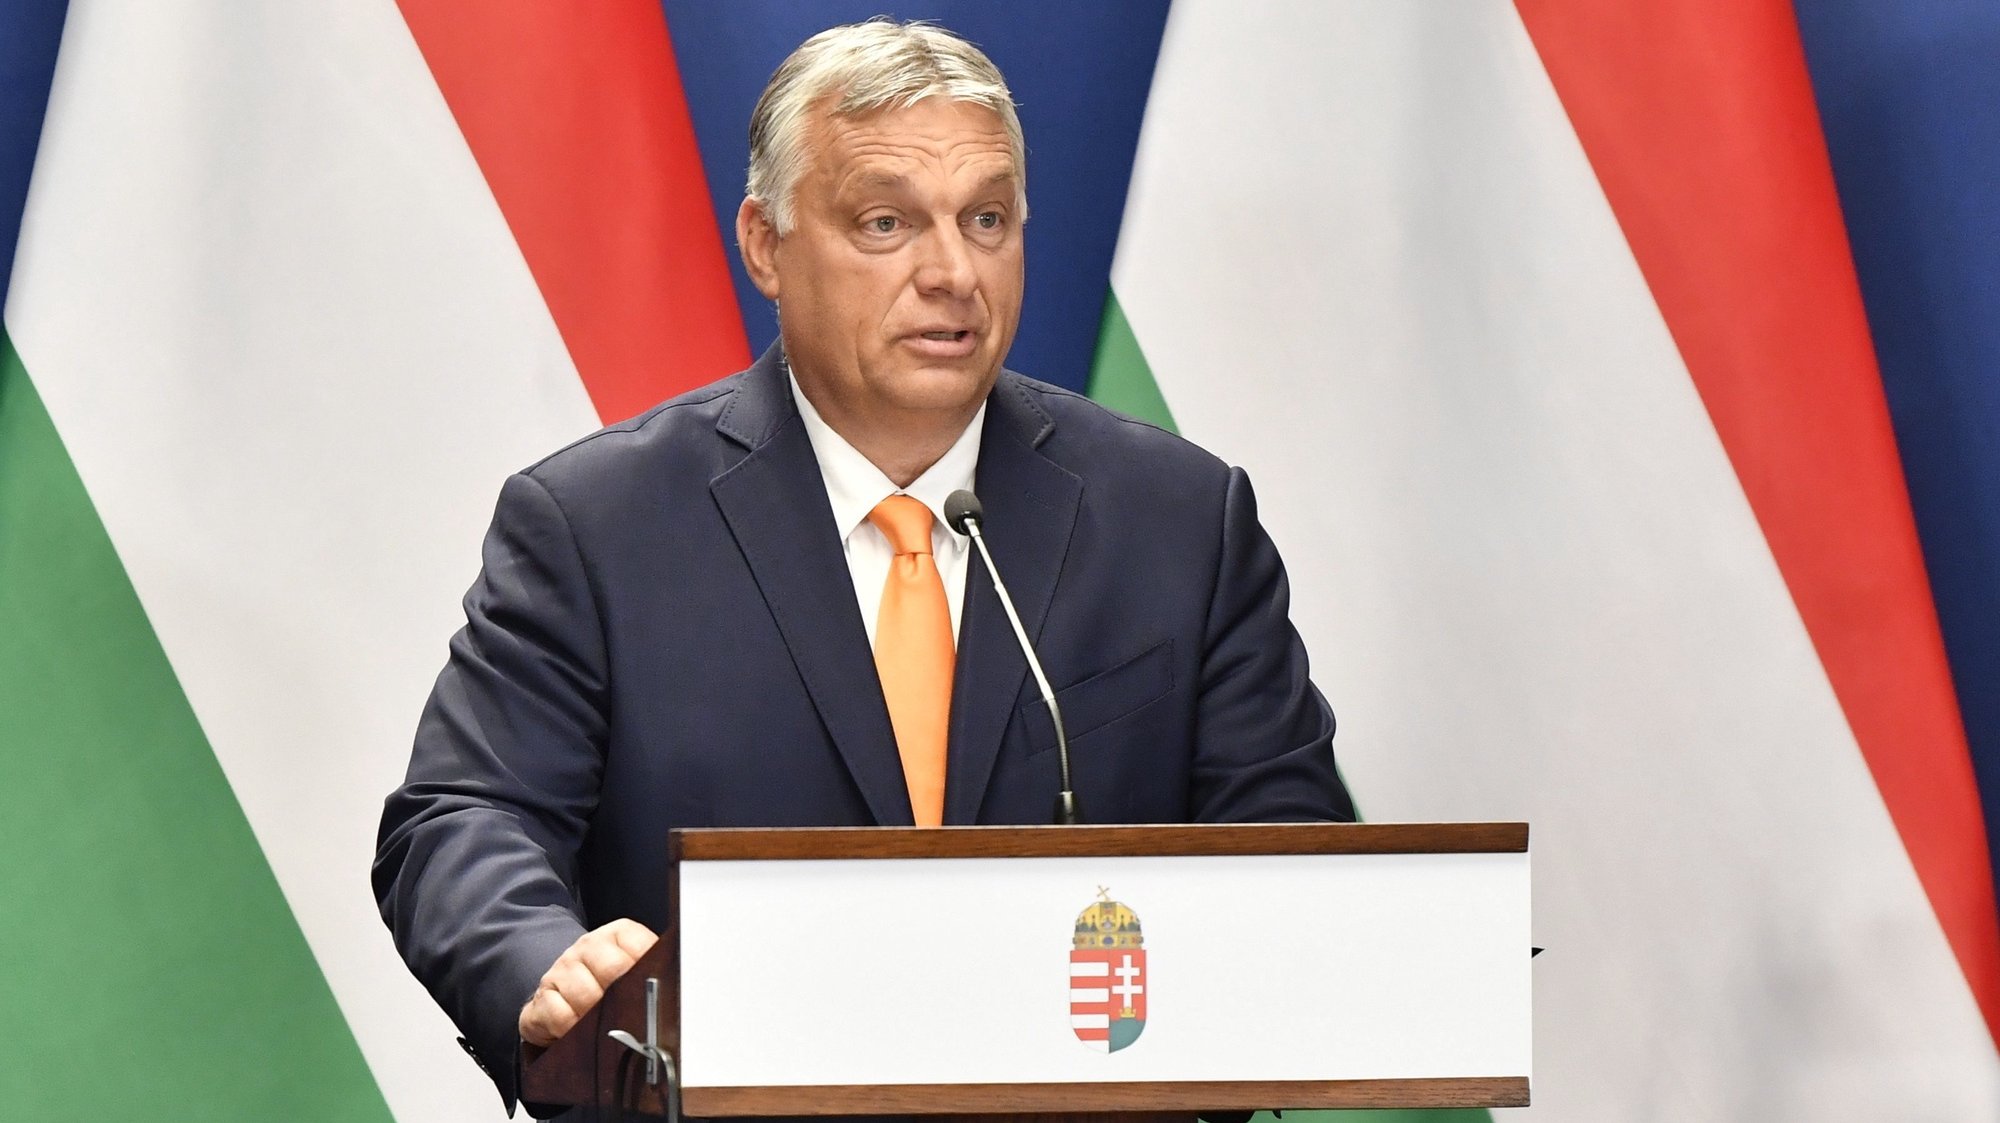 epa09455032 Hungarian Prime Minister Viktor Orban speaks during a joint press conference with his Serbian counterpart Ana Brnabic following the 6th Hungarian-Serbian government summit in Budapest, Hungary, 08 September 2021.  EPA/Zoltan Mathe HUNGARY OUT